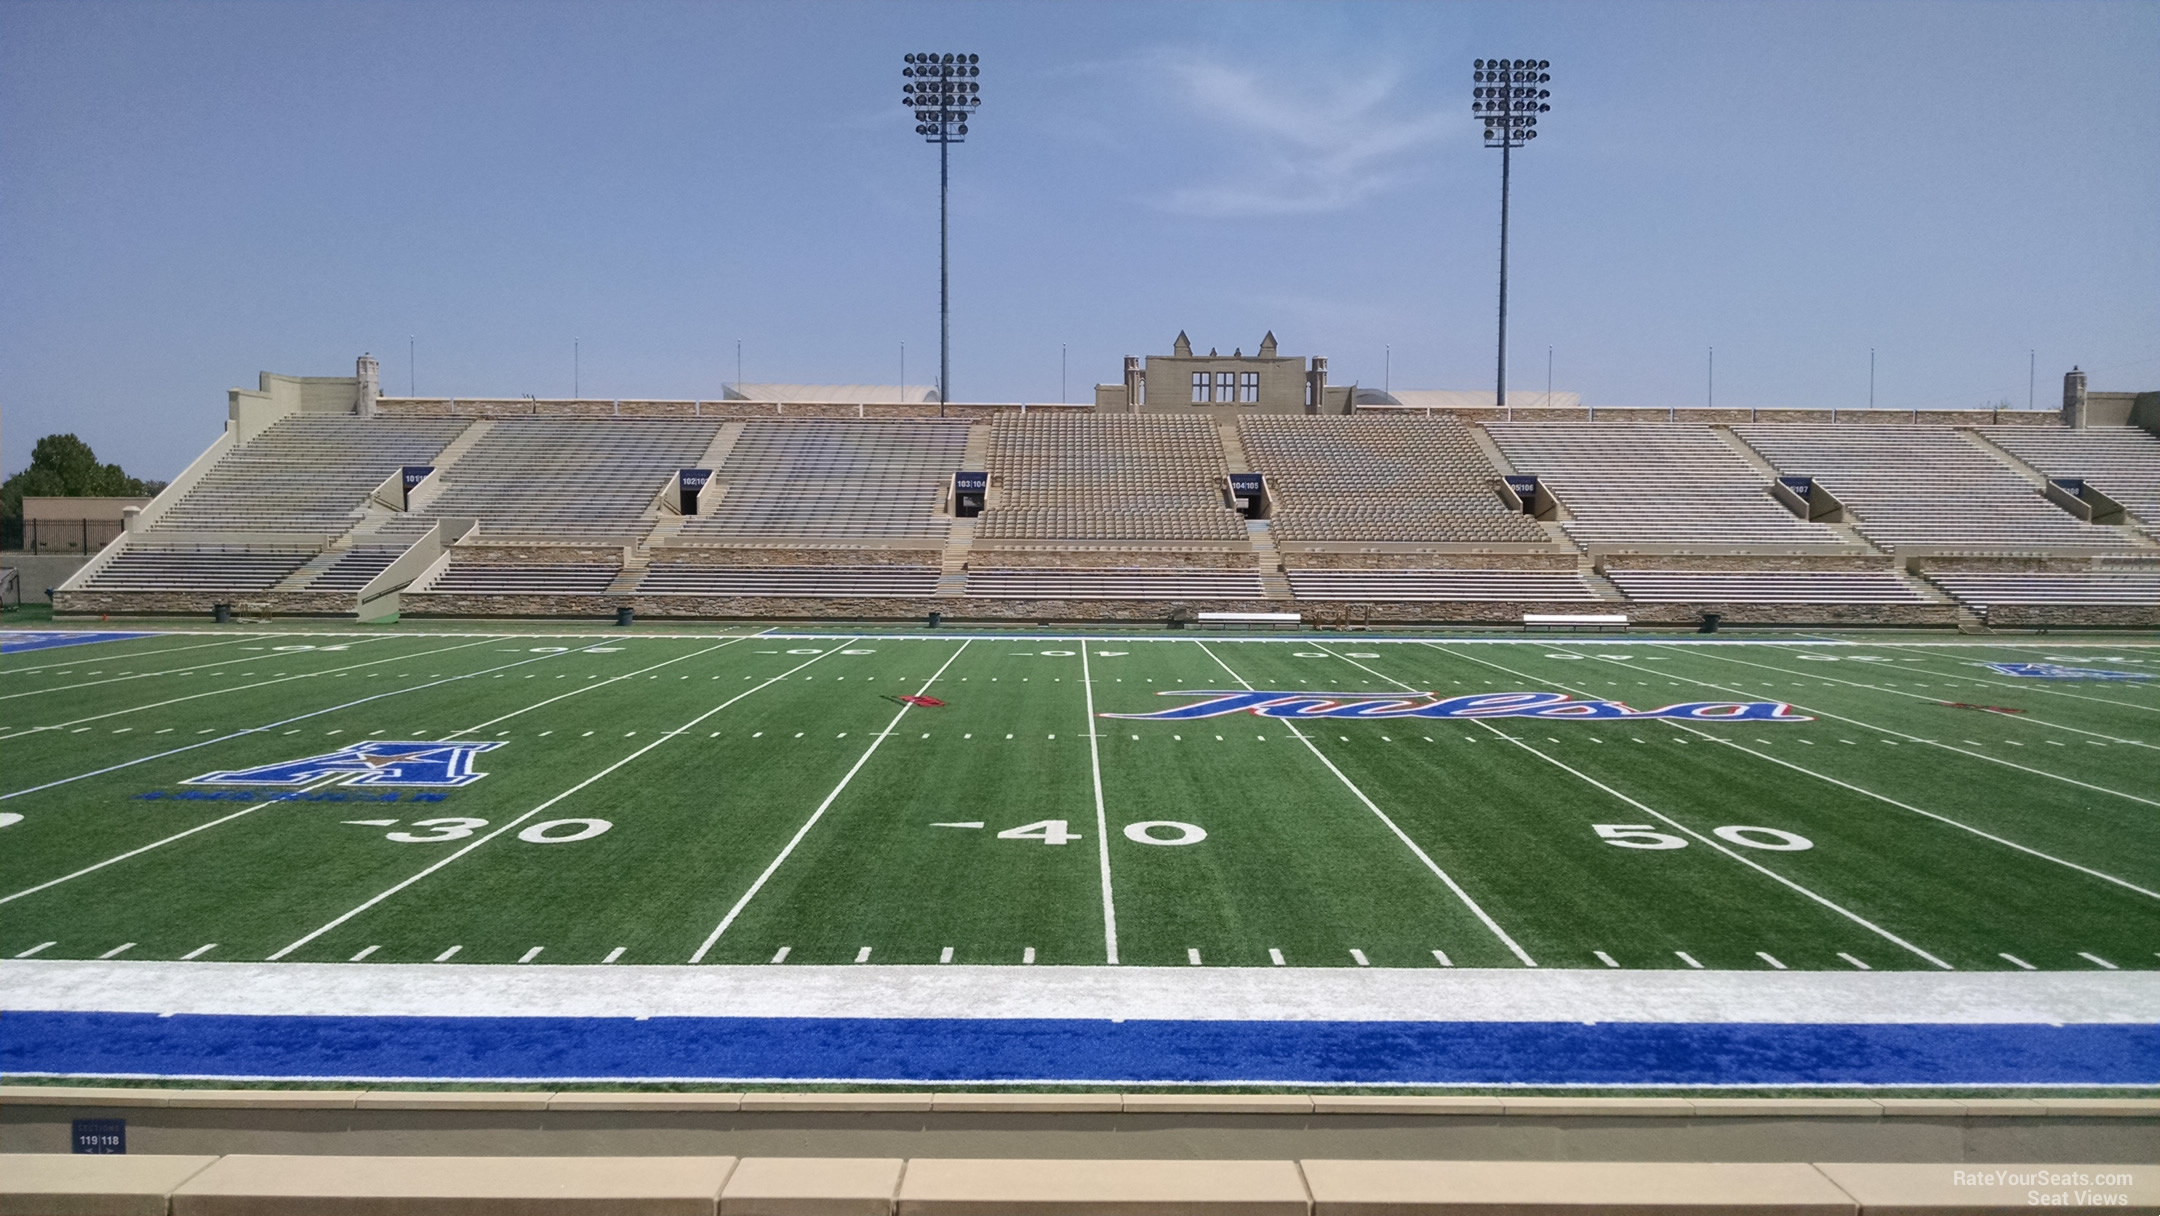 Section 118 at H.A. Chapman Stadium